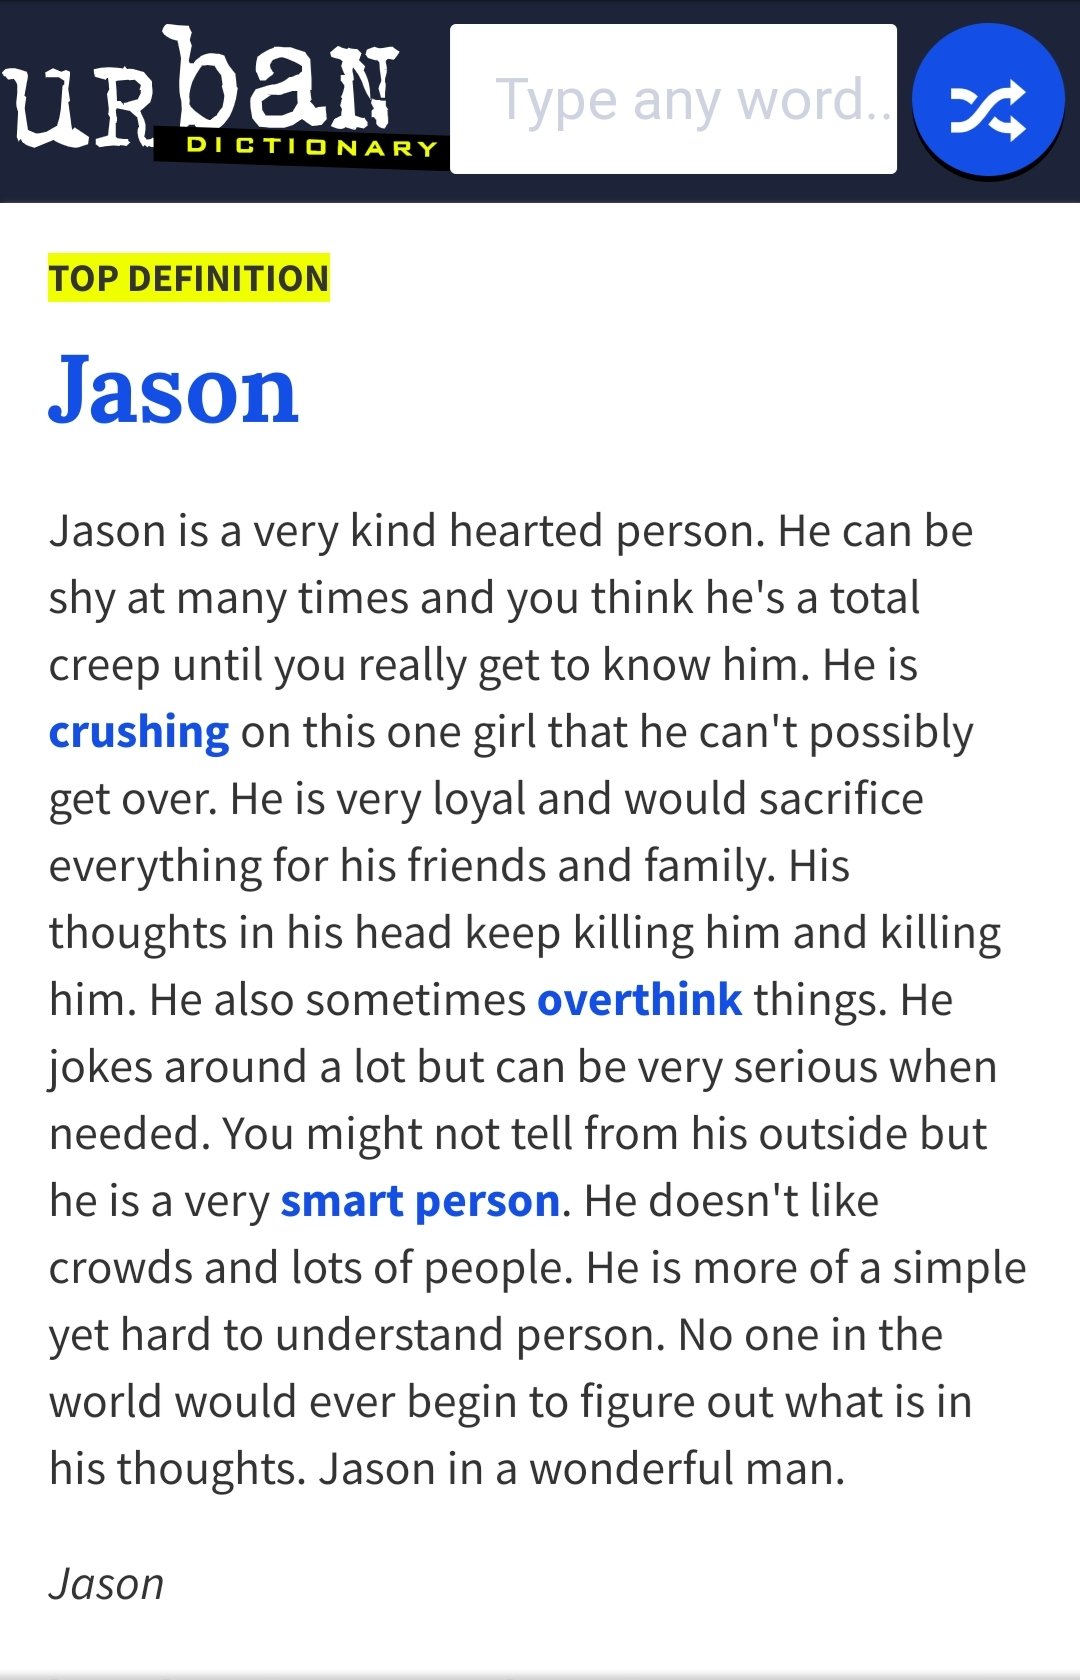 Jason from the Basement on X: So I guess your top definition on Urban  Dictionary is a thing today. So here's mine:  / X